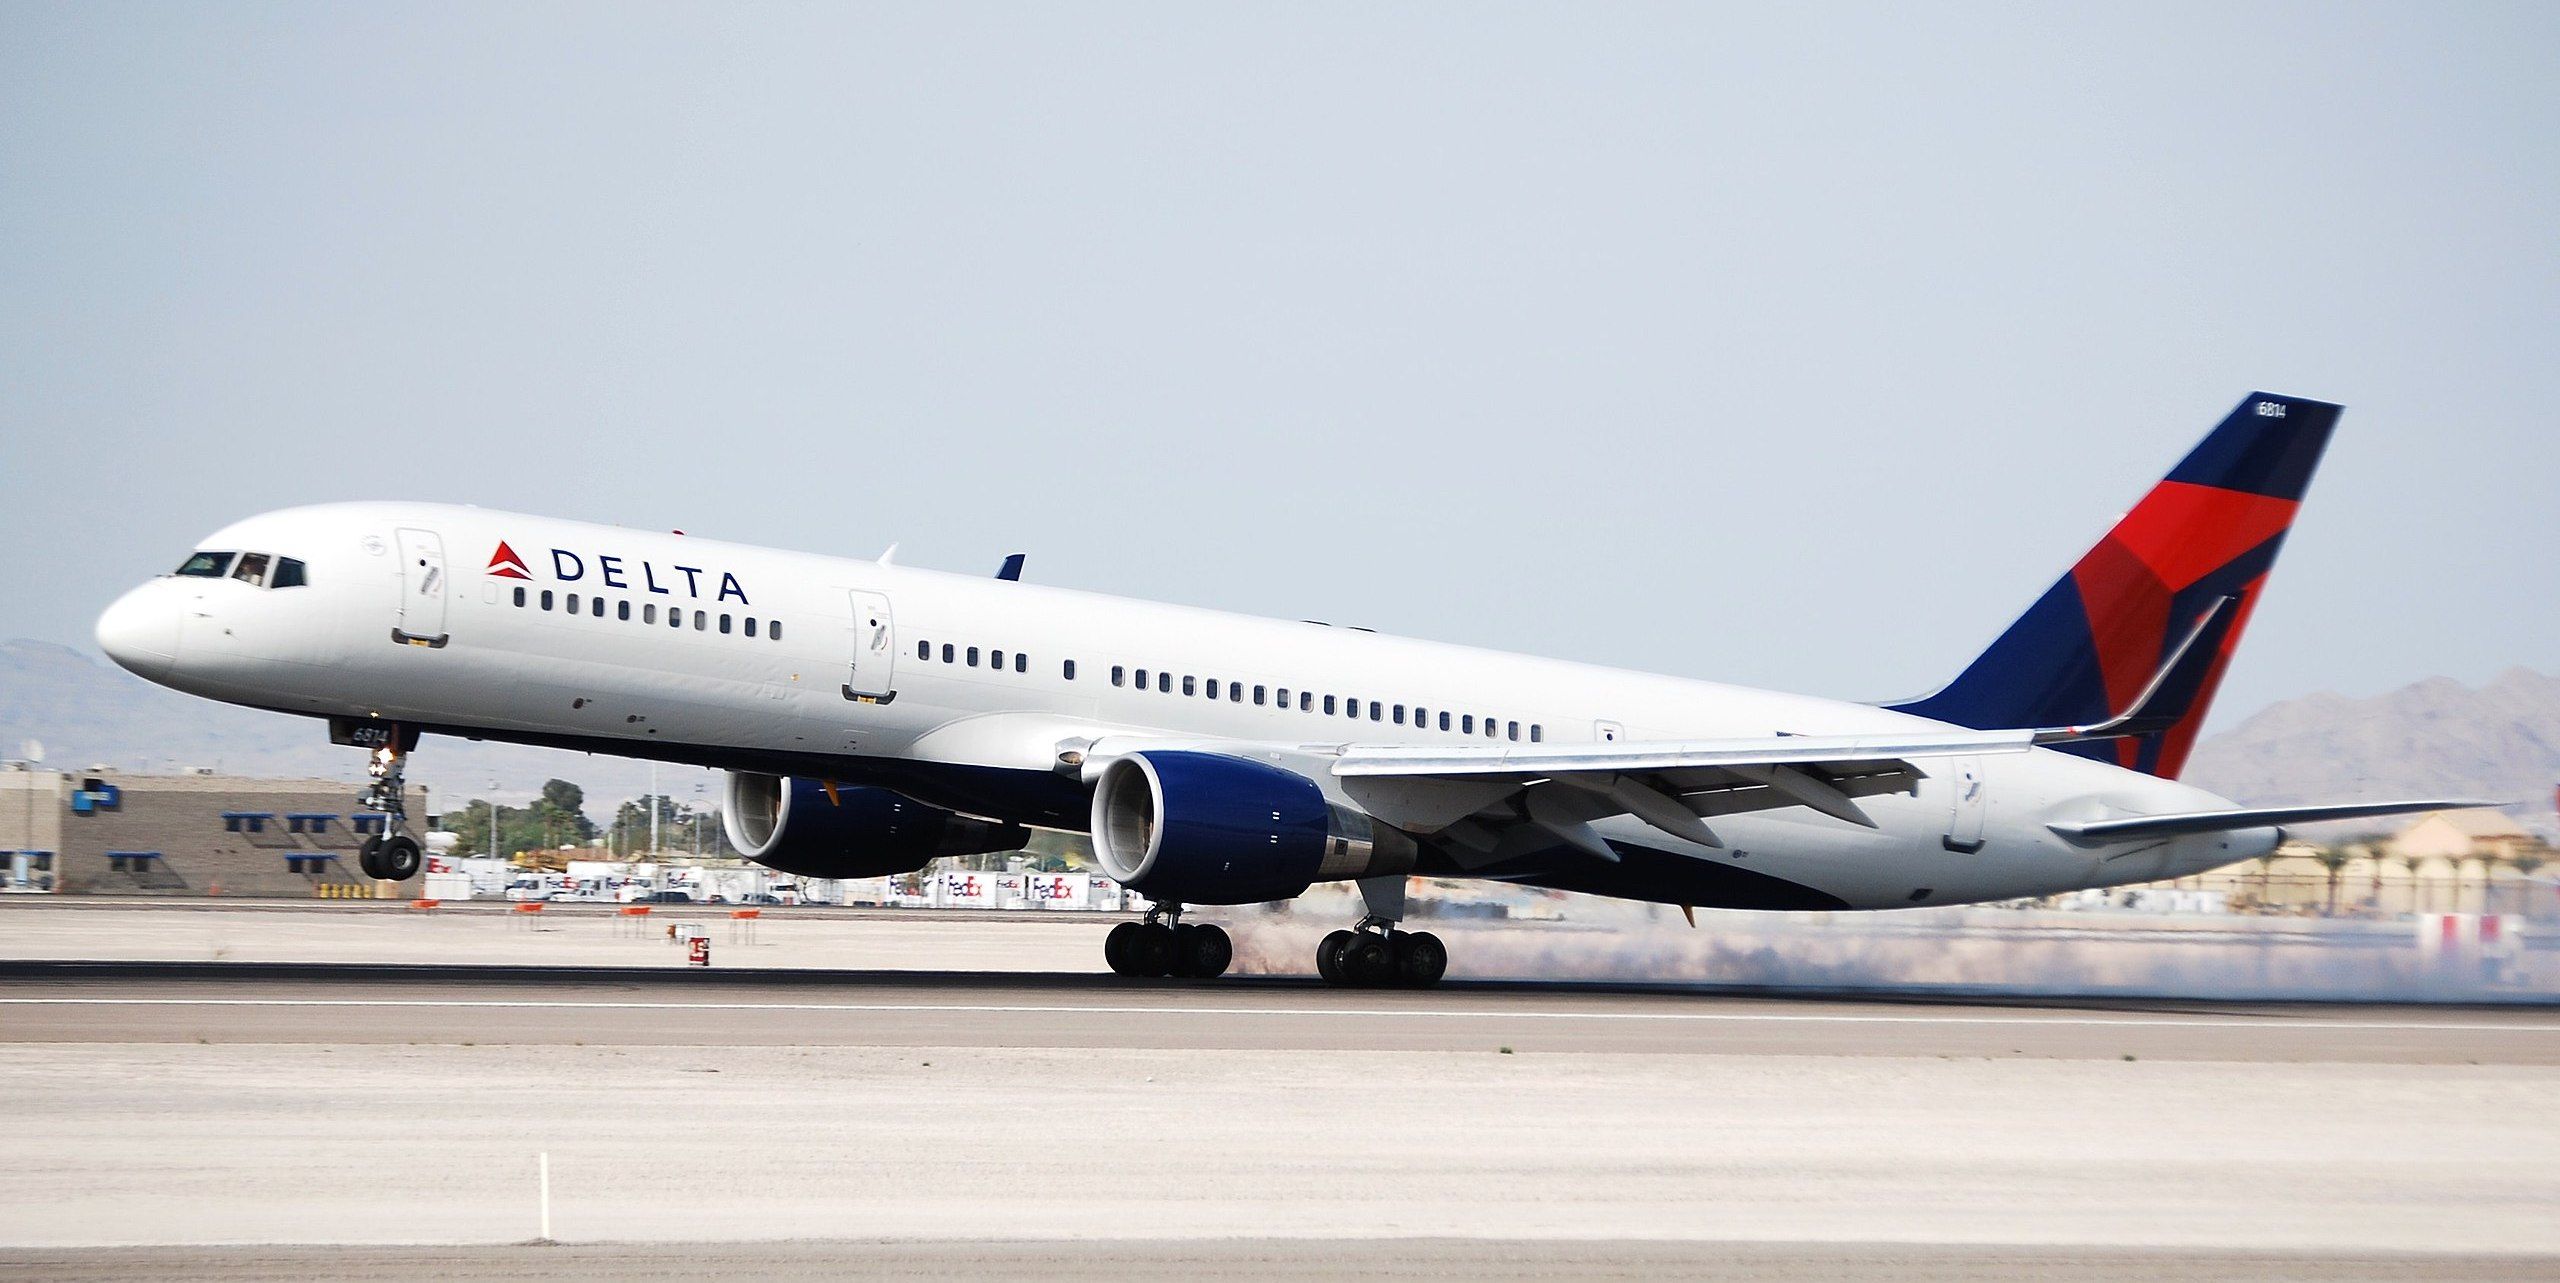 What Are The Oldest Active Aircraft Flying At Delta Air Lines?